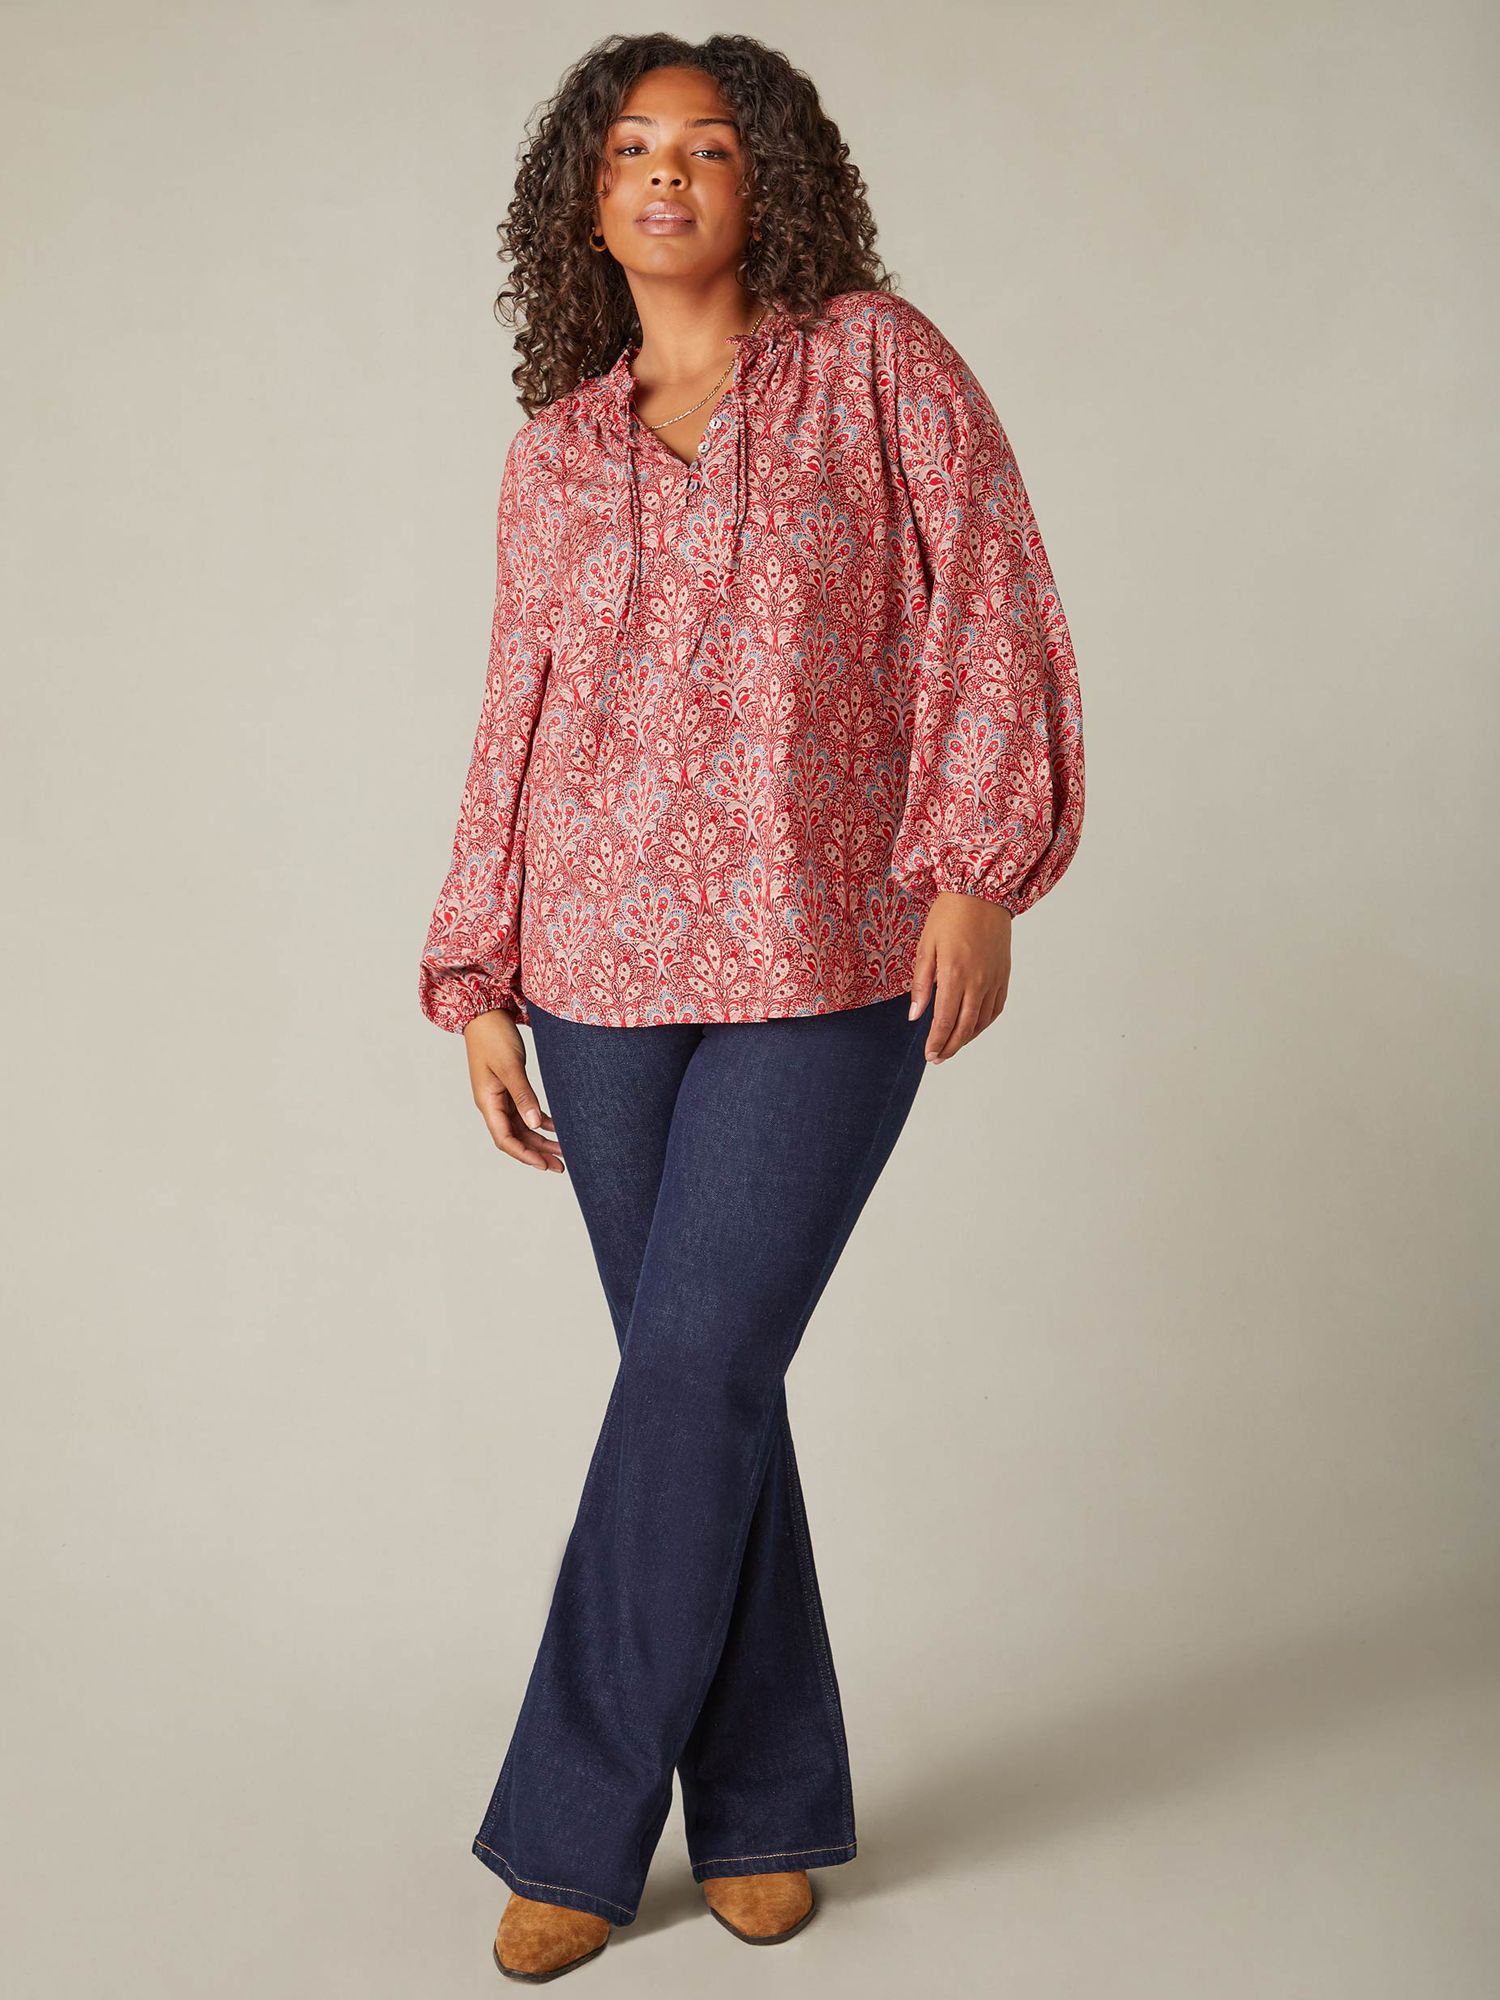 Adult 60's Paisley Top and Black Bell Bottom Pants - Candy Apple